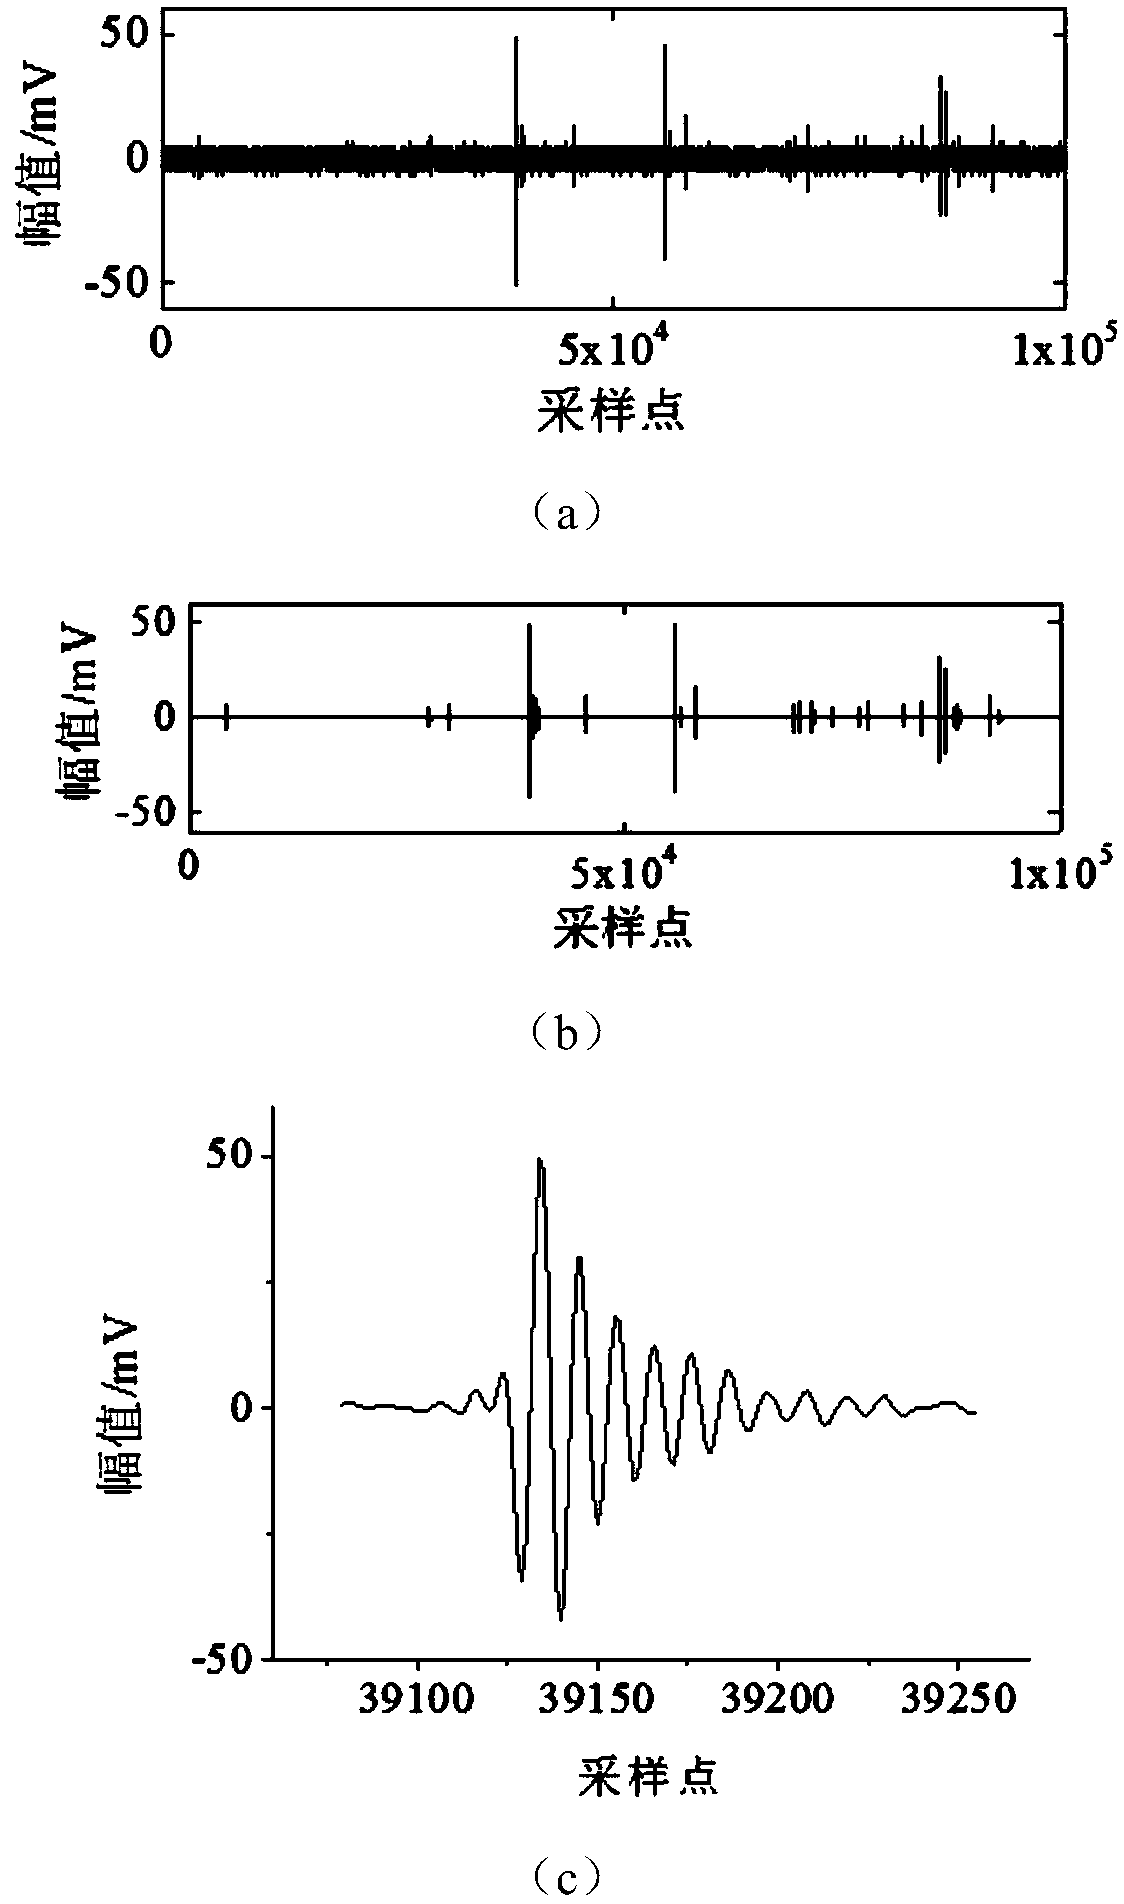 Partial discharge signal processing method considering pulse extraction and signal denoising and partial discharge positioning method for power cable